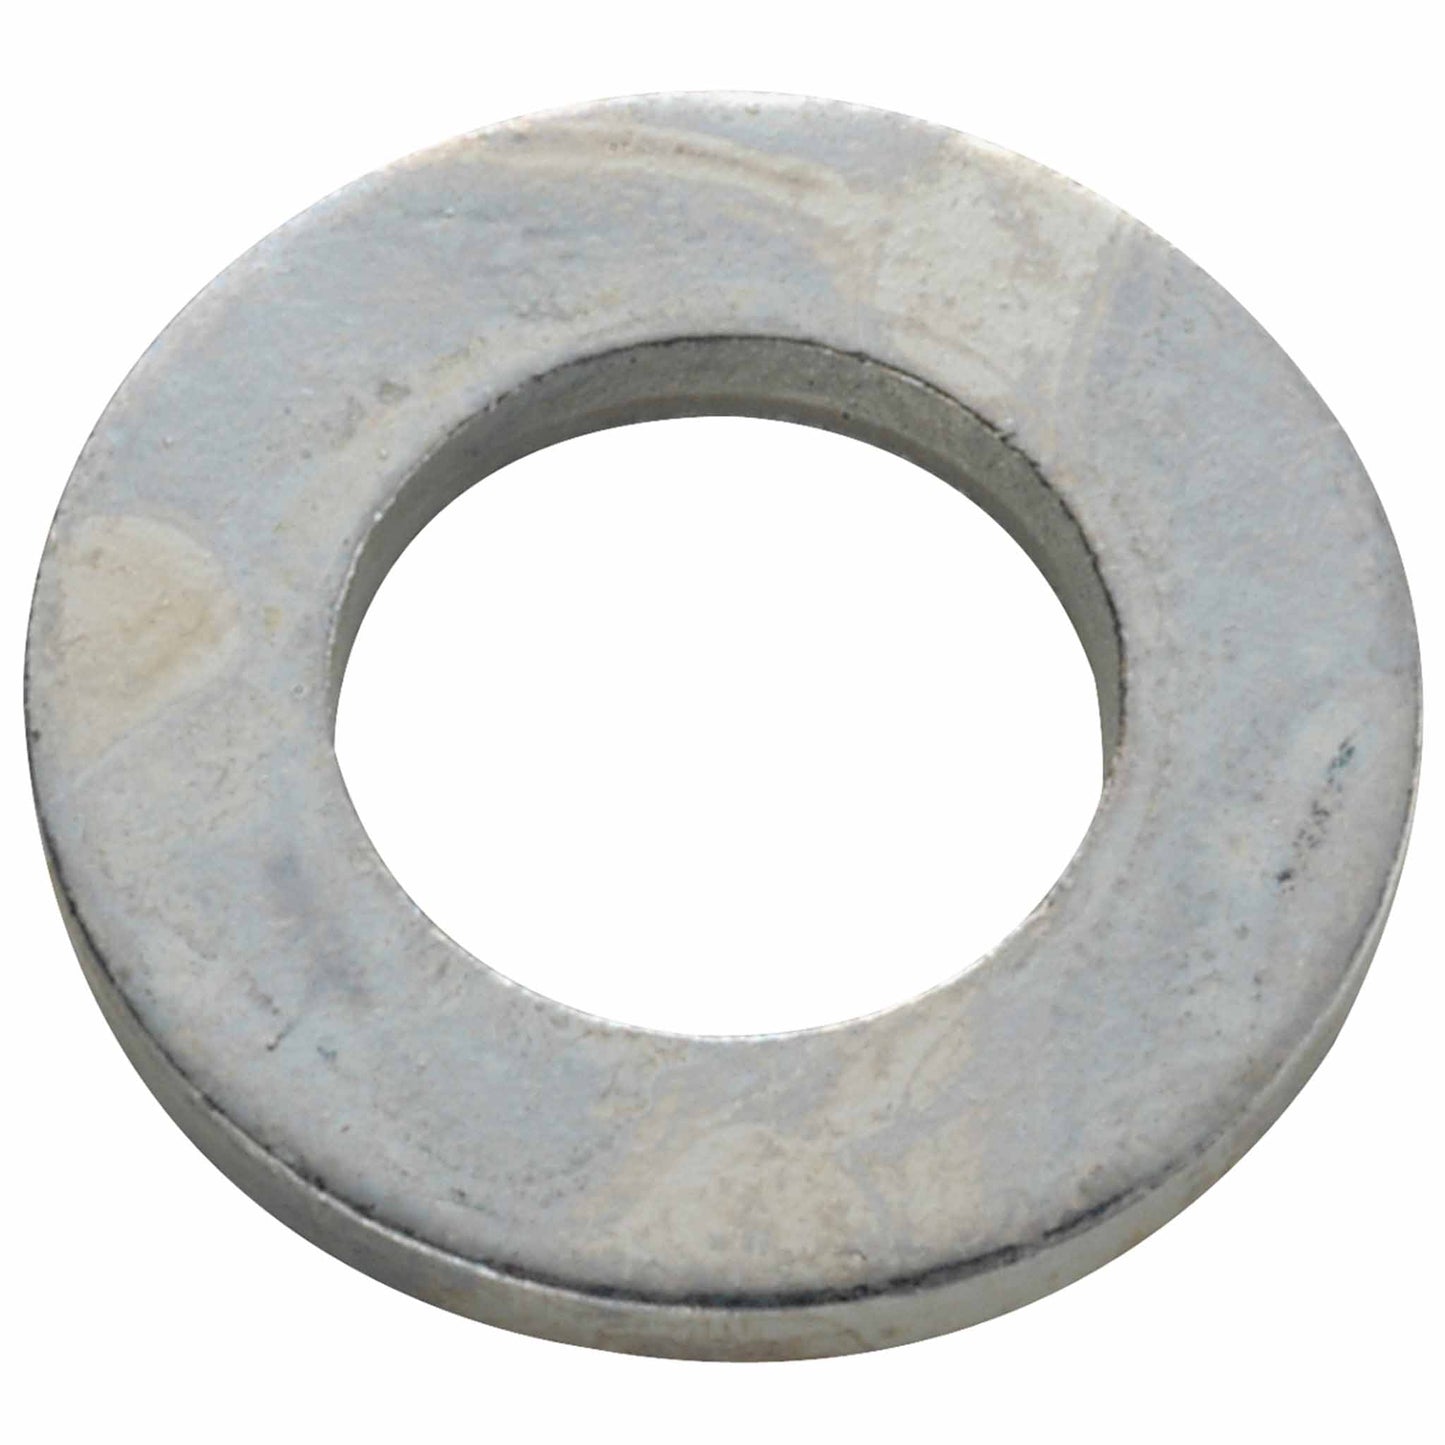 Axle washers 18 x 10.5 x 1.5 stainless steel